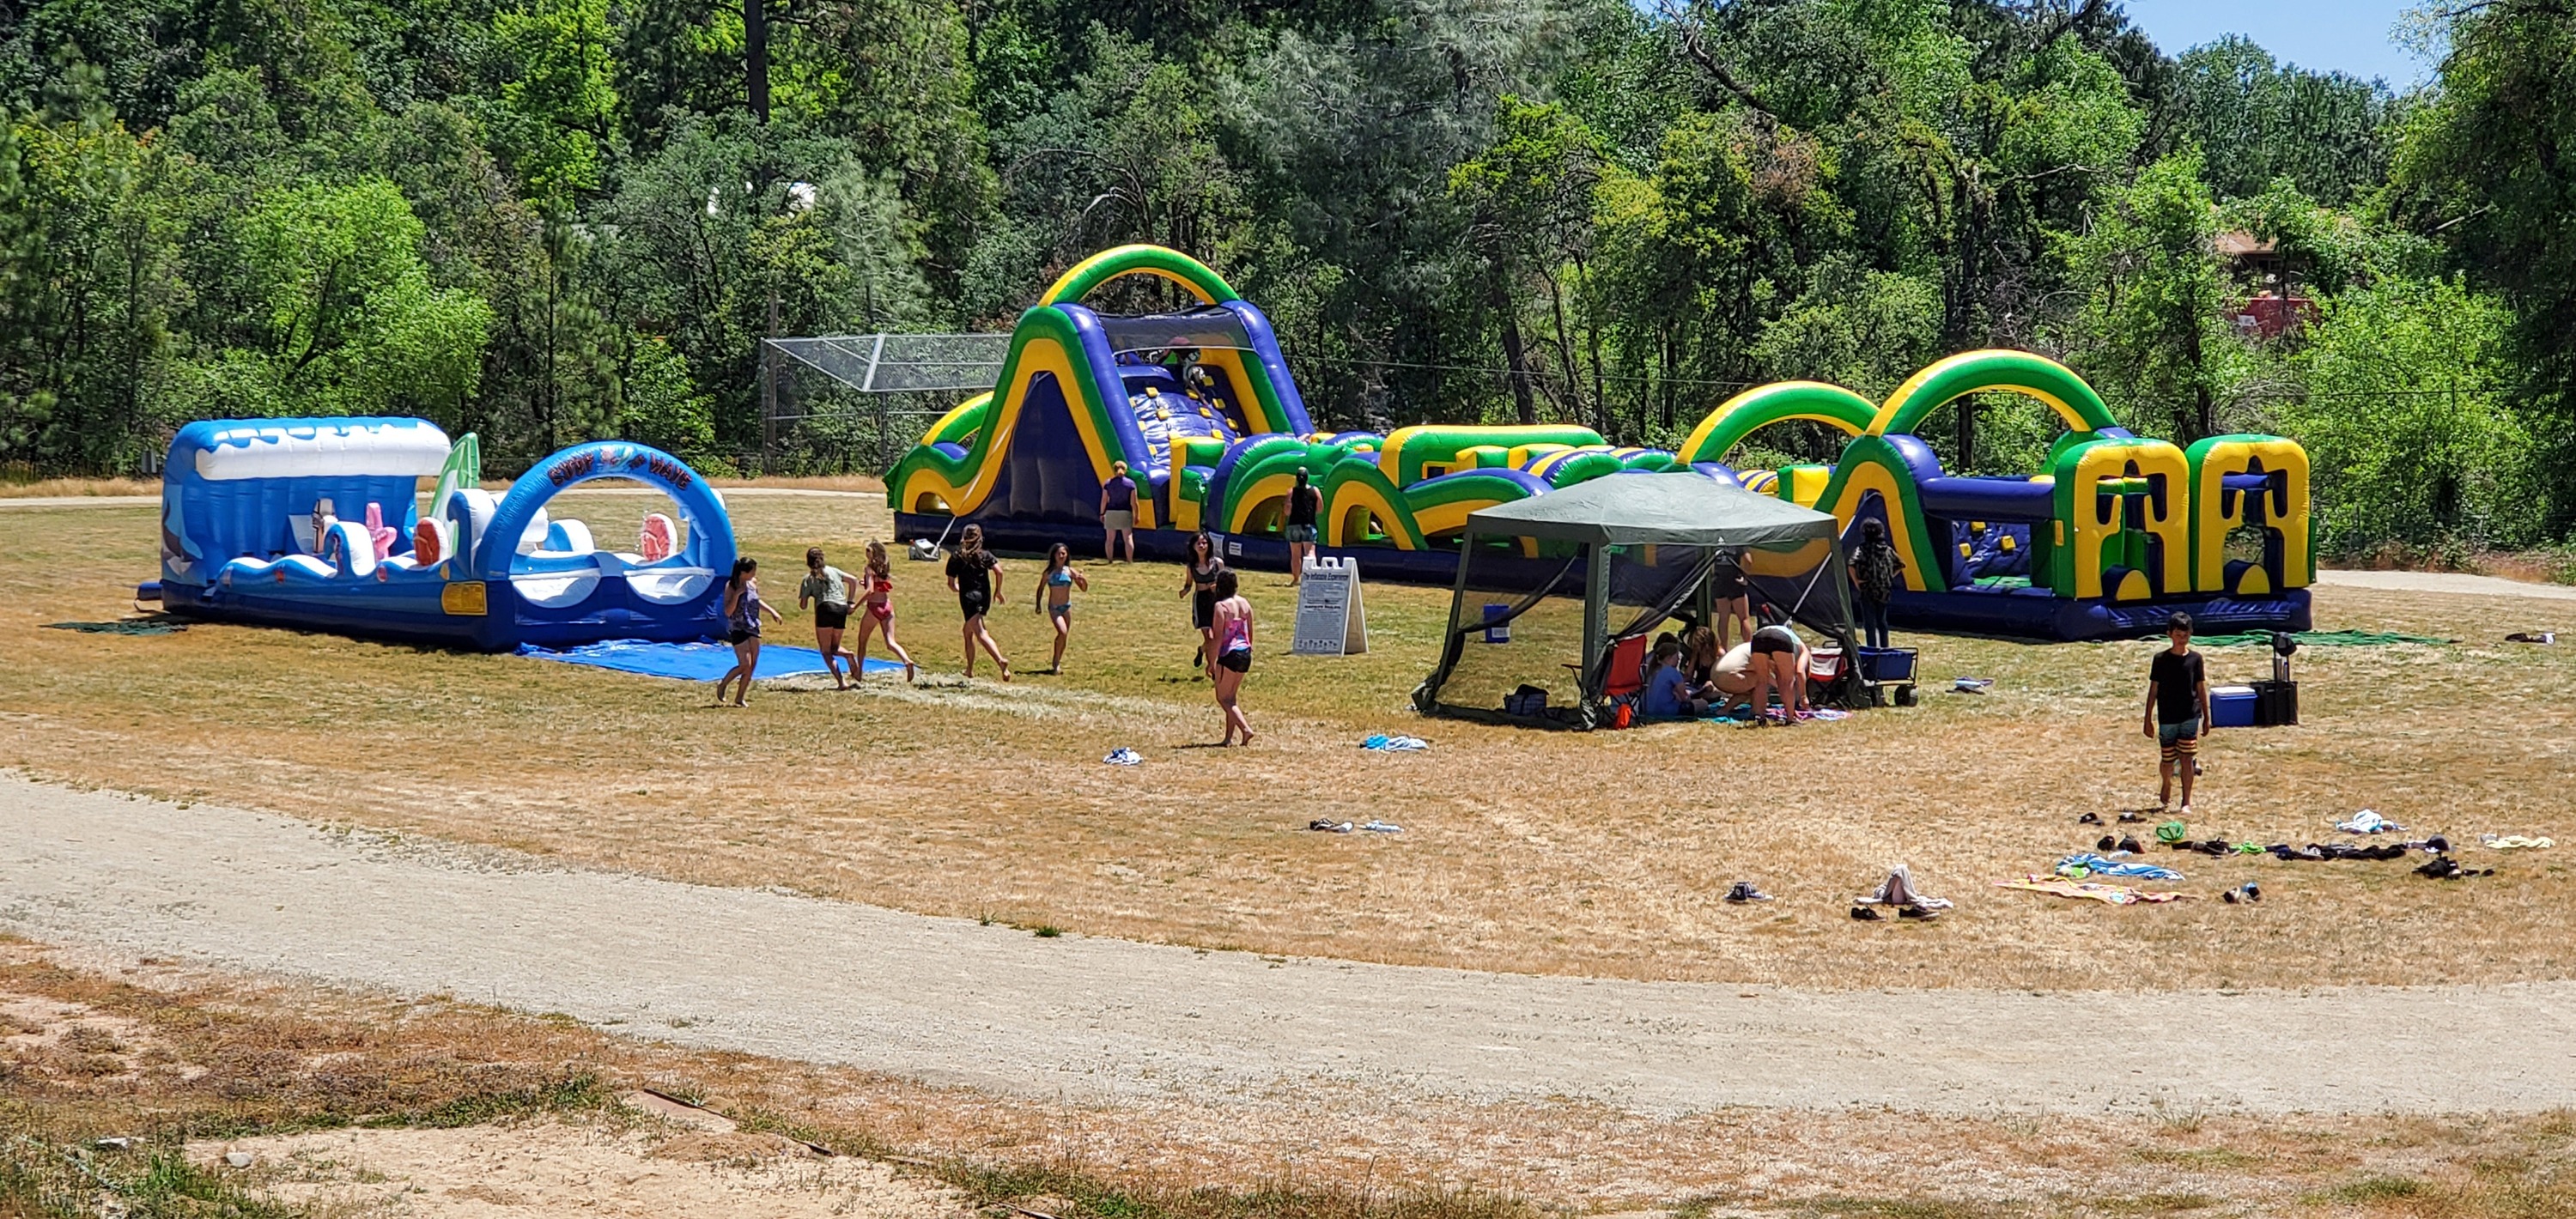 grass-valley-inflatables-and-bounce-houses-for-rent